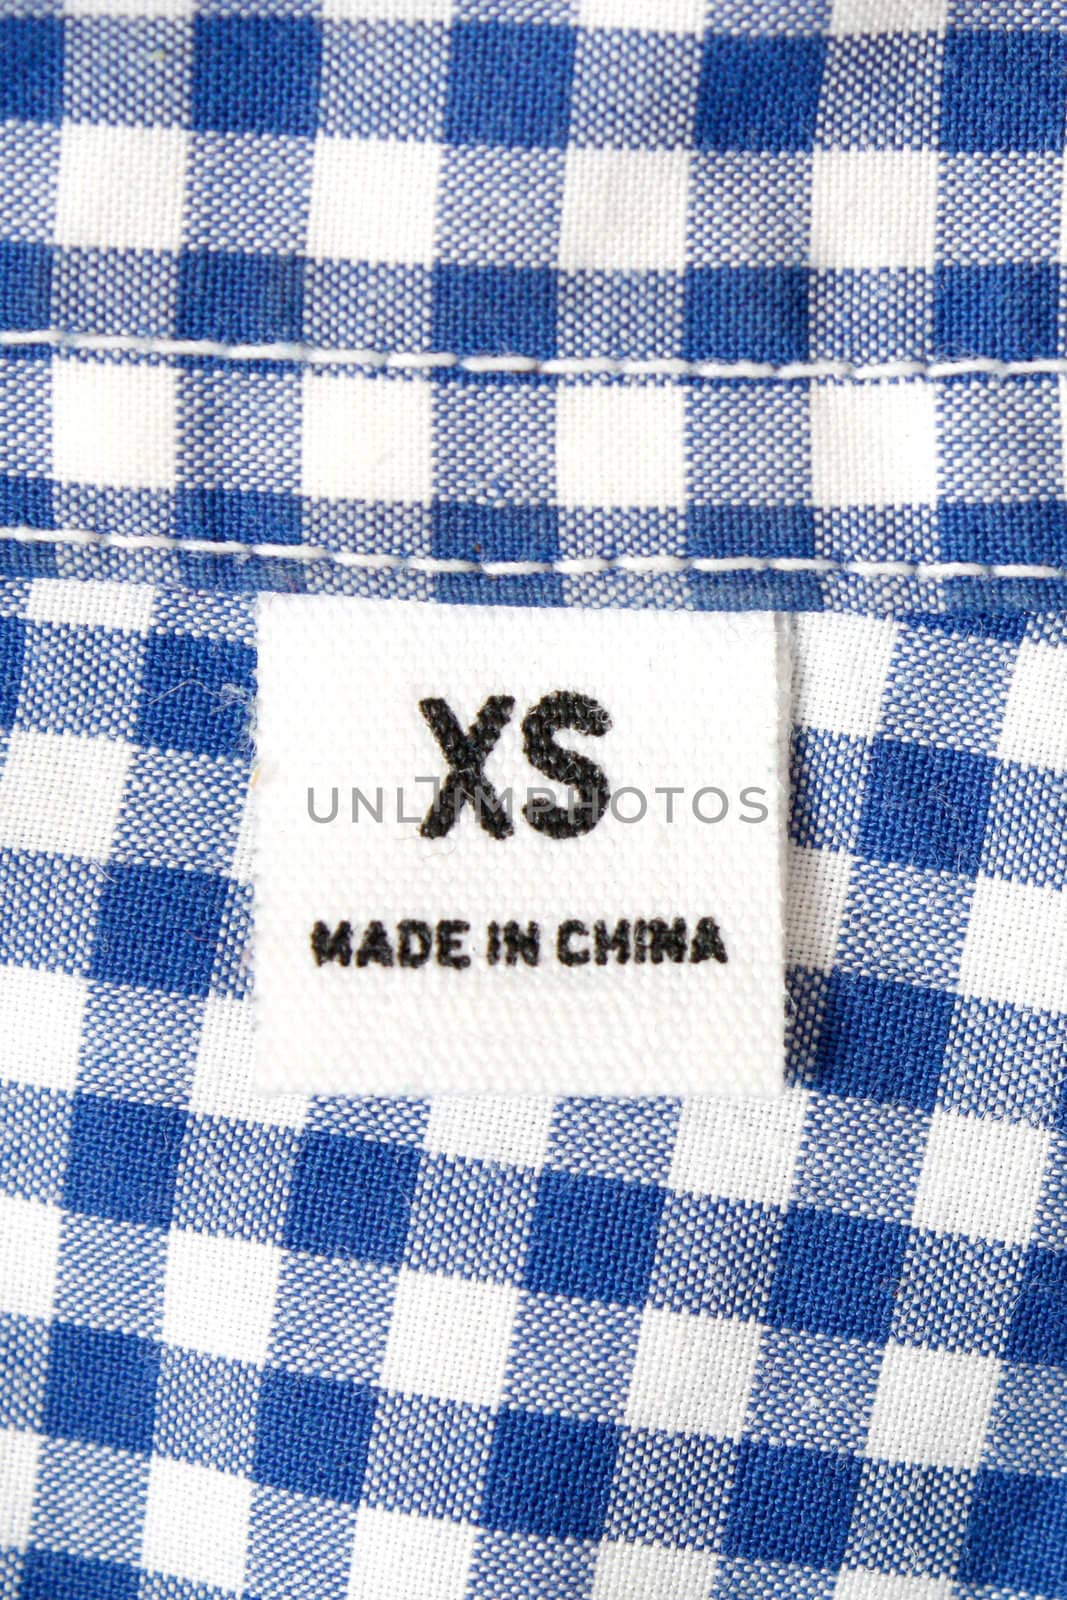 An extra small label on a shirt